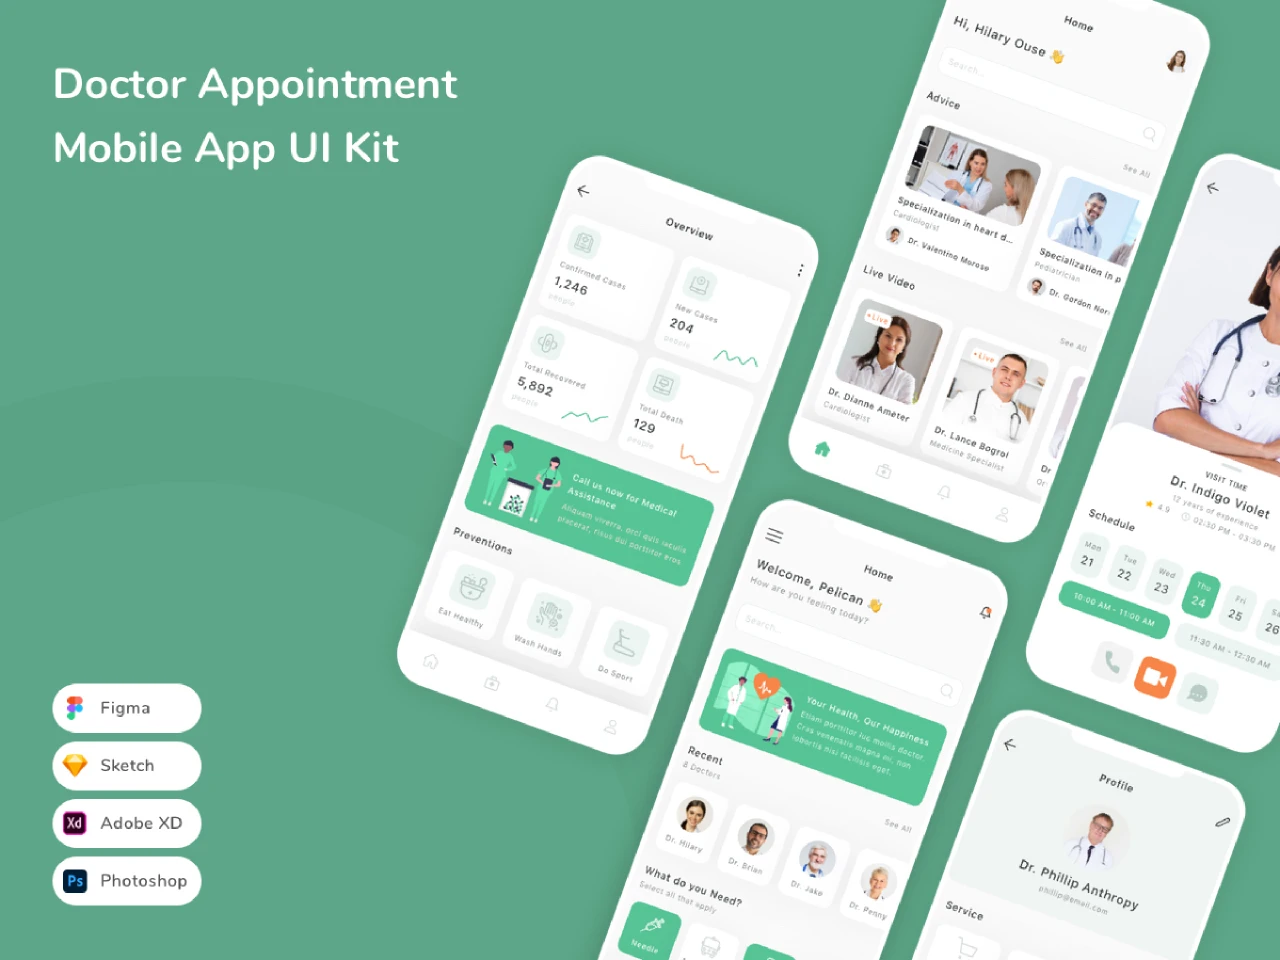 Doctor Appointment Mobile App UI Kit for Figma and Adobe XD